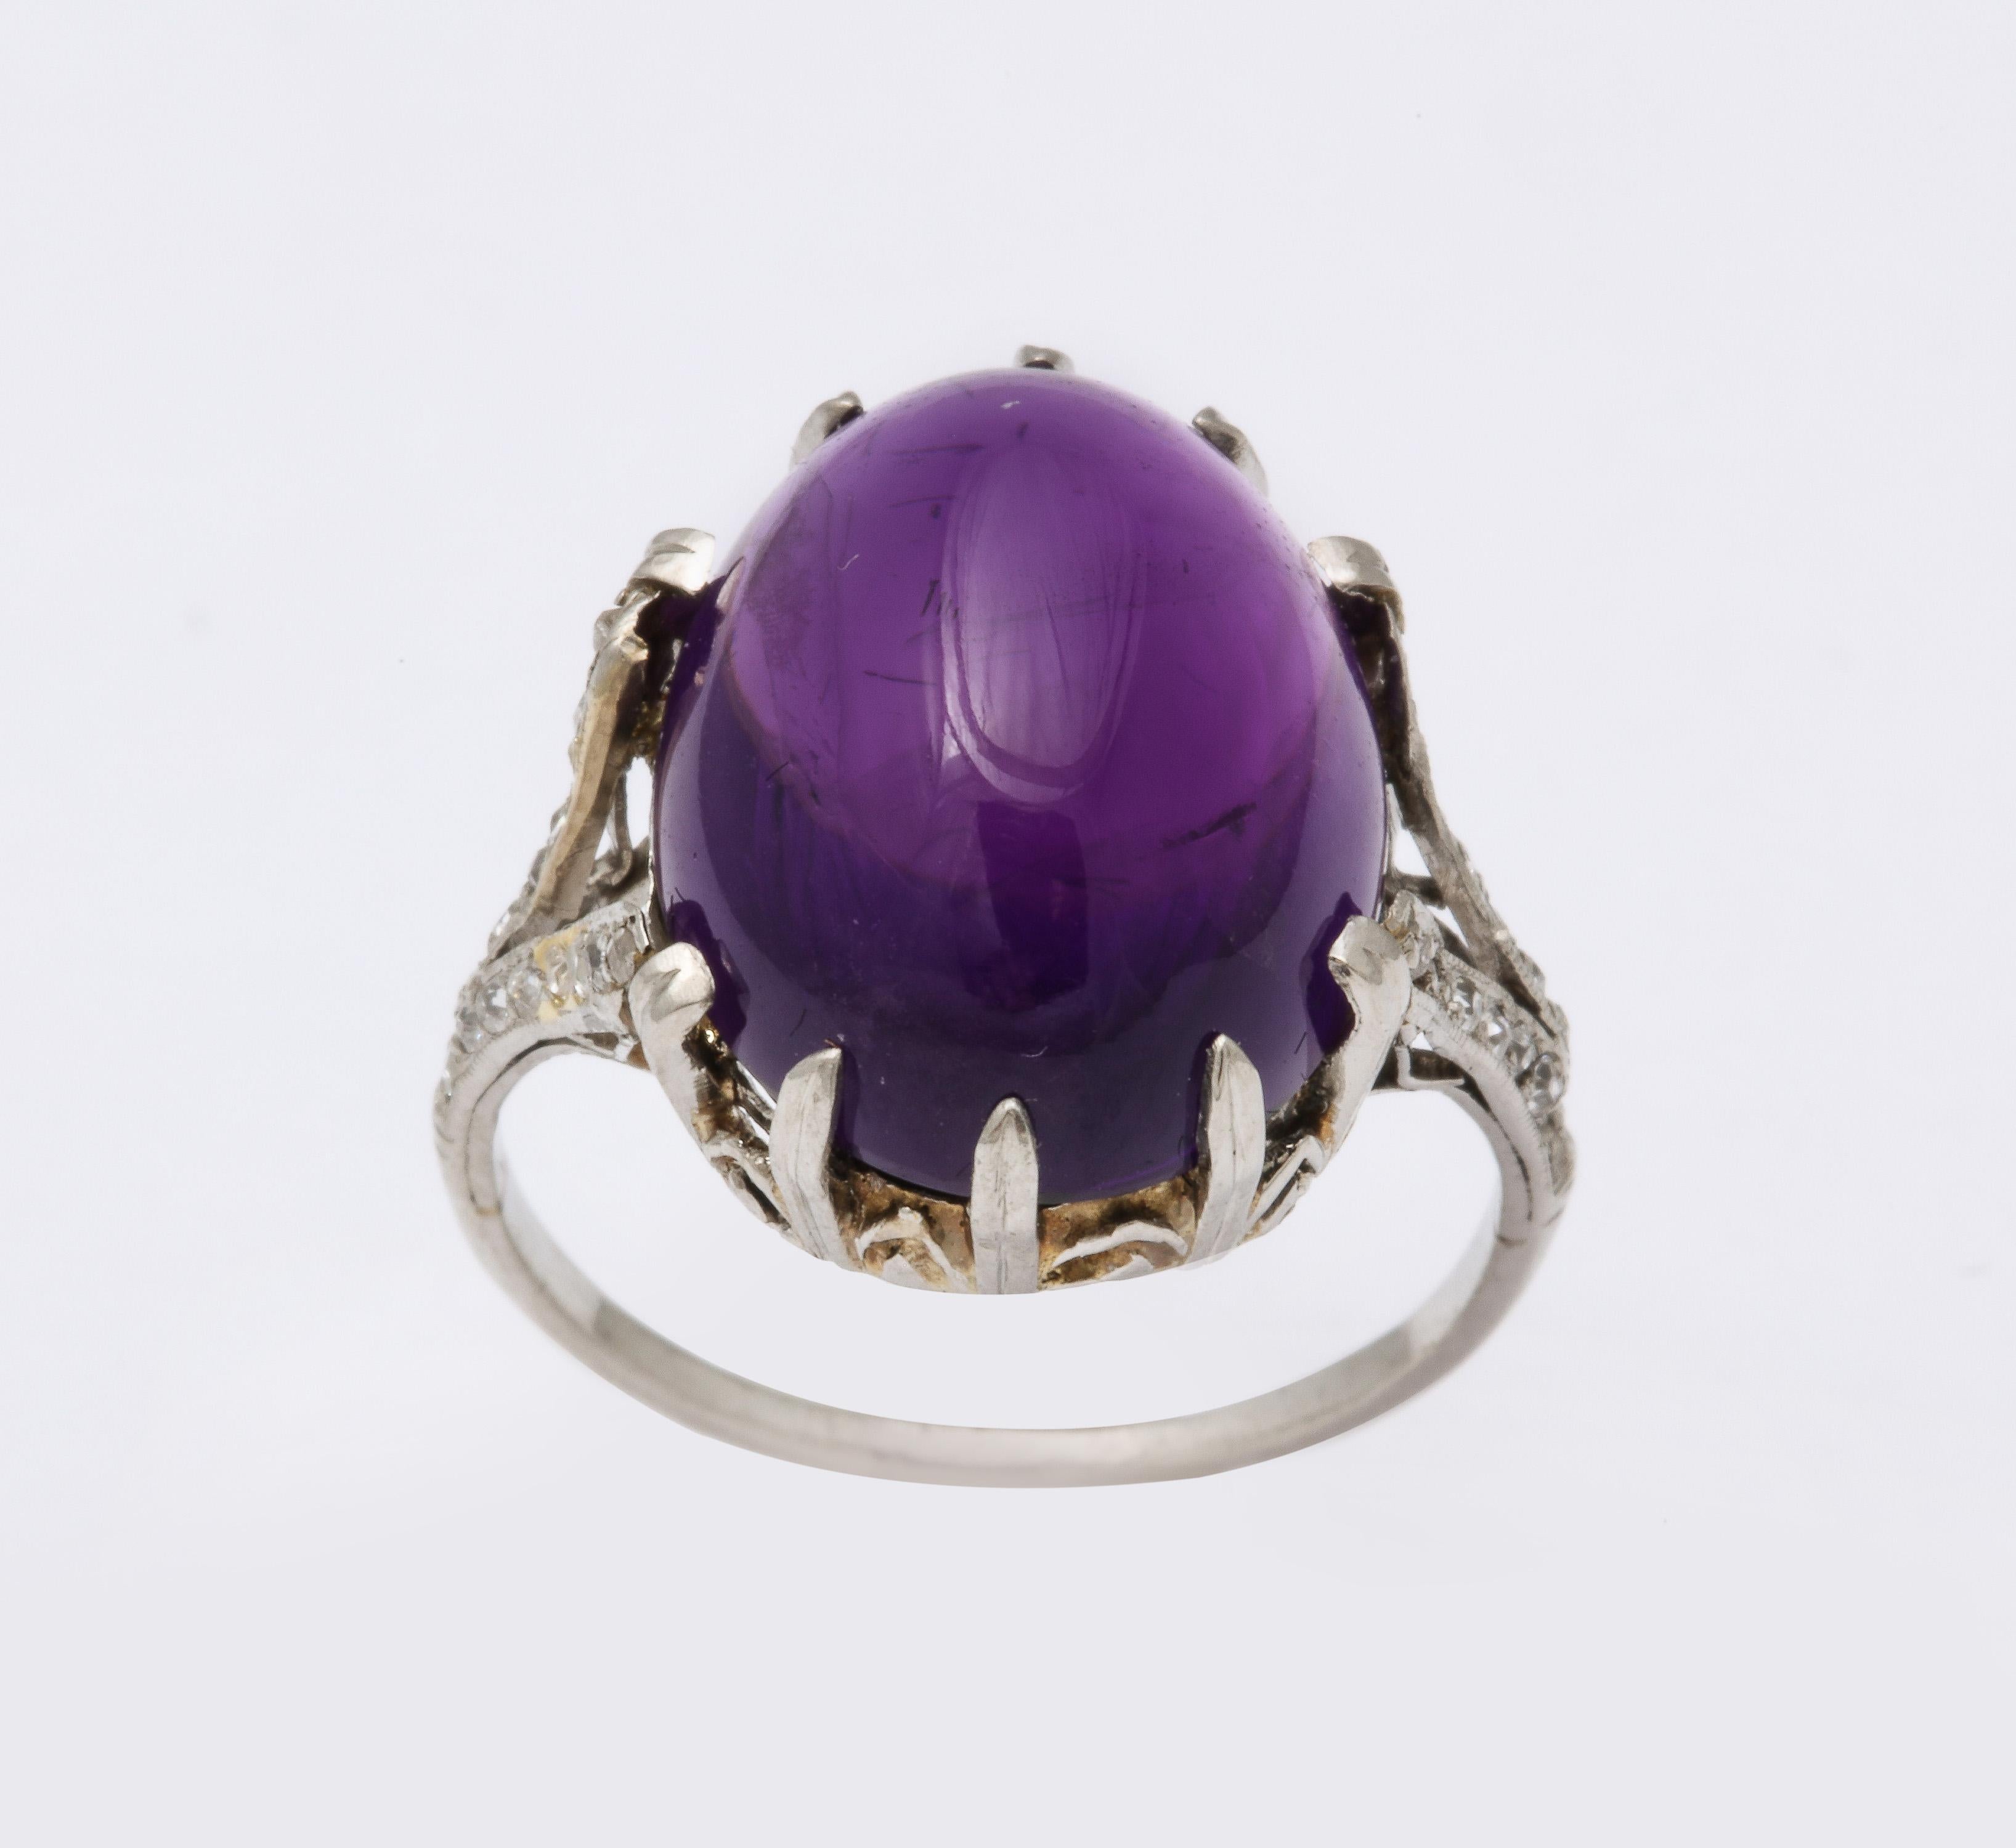 Beautiful Prong set Oval cabochon Amethyst Ring set on lacy mounting with old mine Diamonds on the split shank.  Ca 1915-25.  Very old world and sophisticated.  Approximately 9.5 carats.